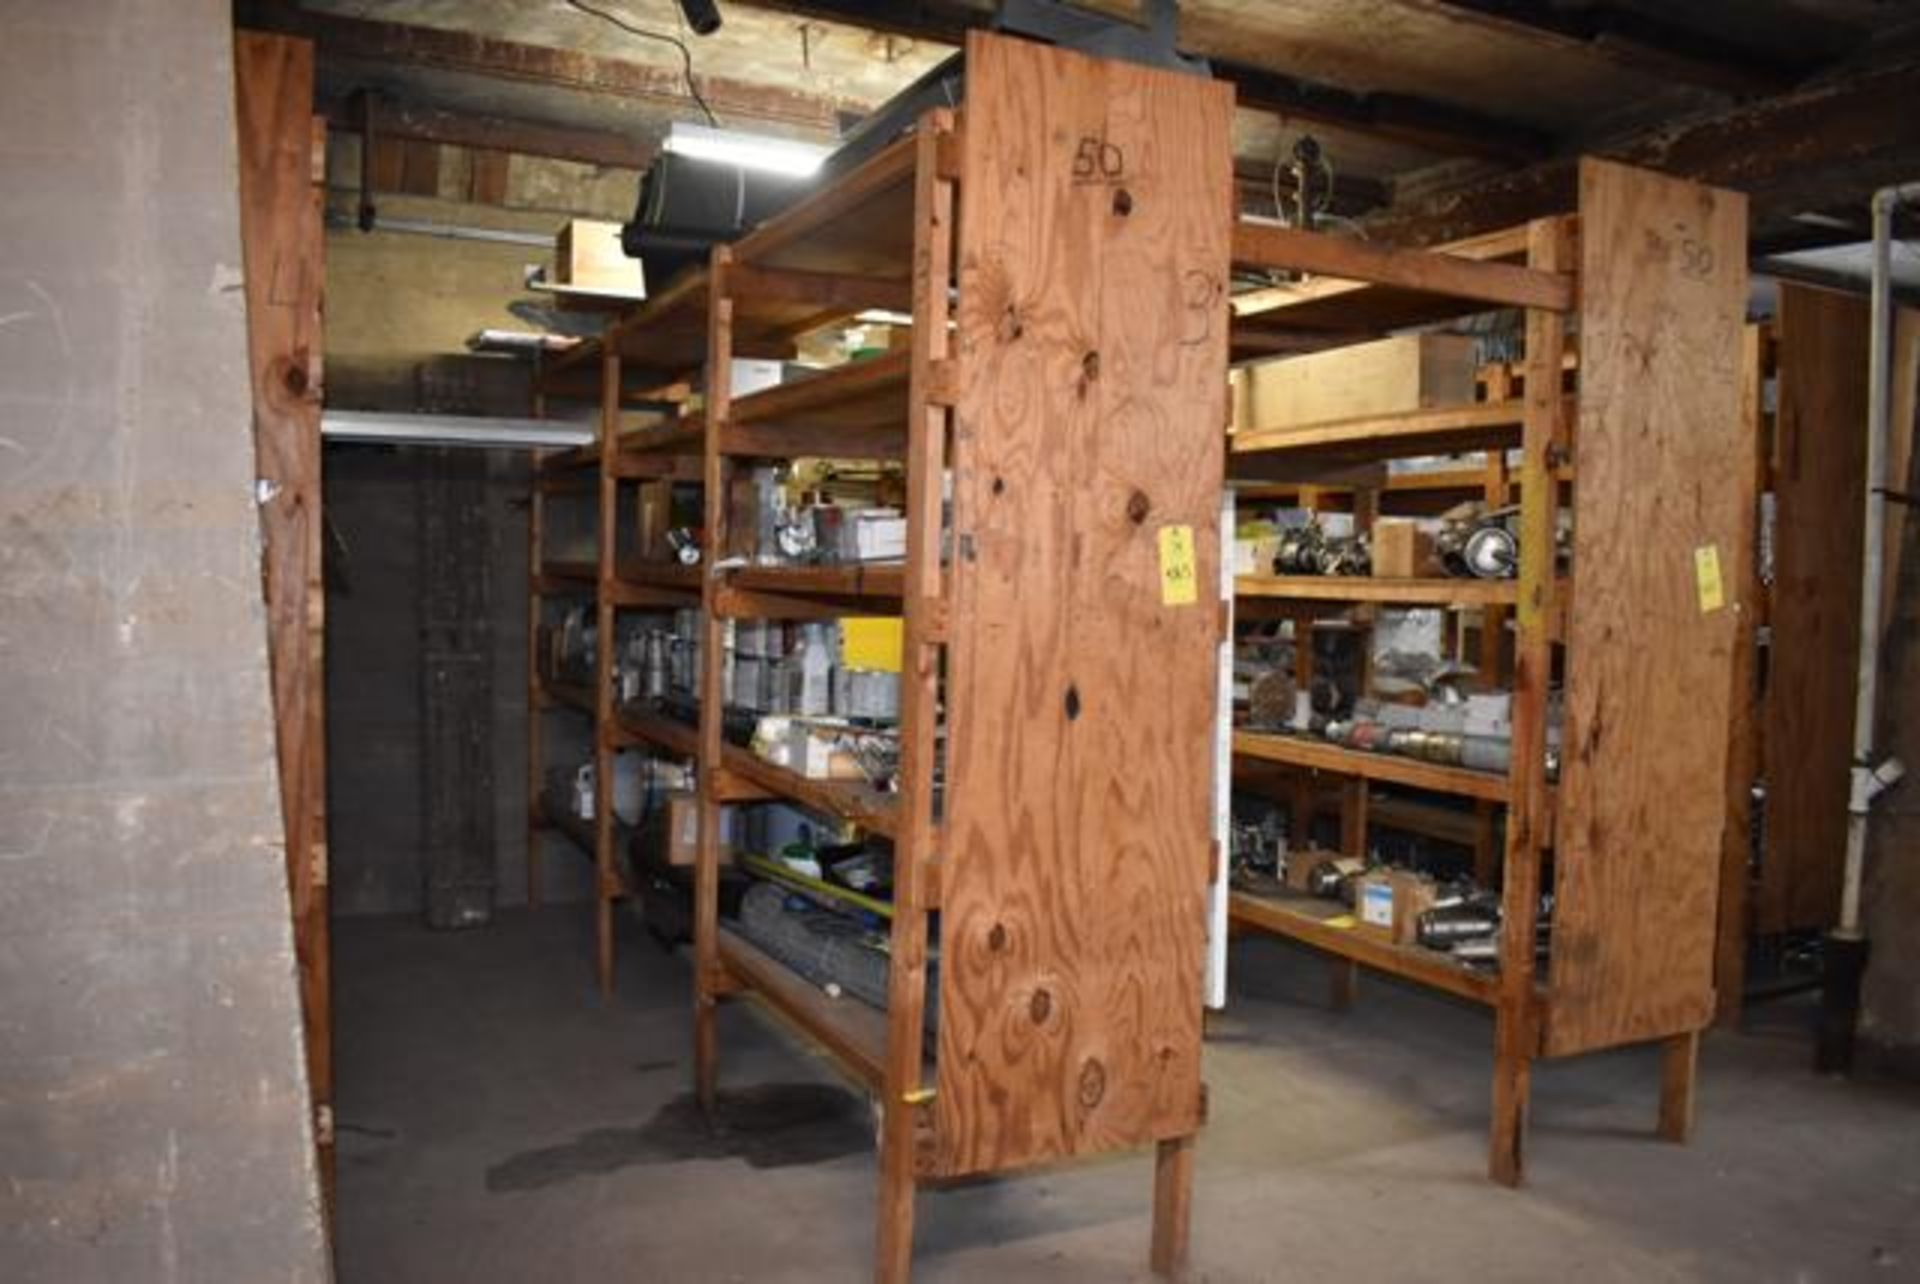 Qty. (6) Wood Shelf Contents - Plant Support, Partial Wire Spools, Clamps, Loading Fee: $500 - Image 3 of 5